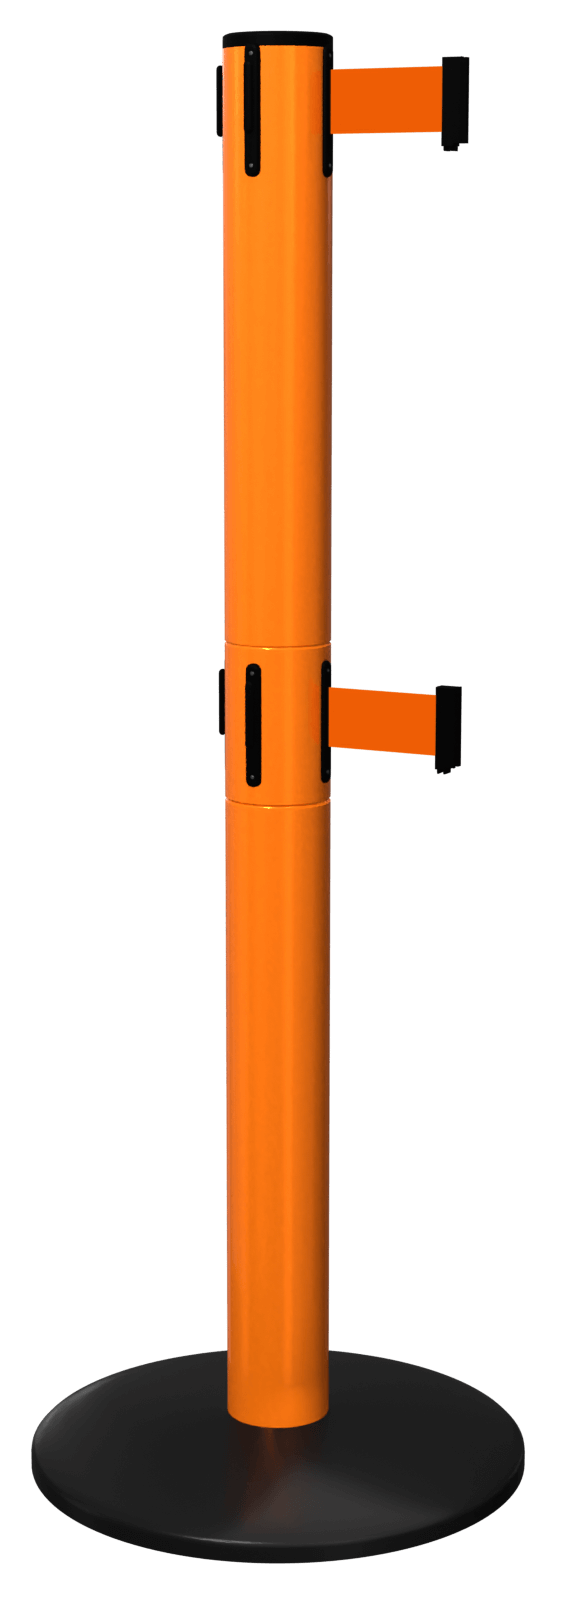 SafetyPro Twin Retractable Barrier in Orange with Orange Tape